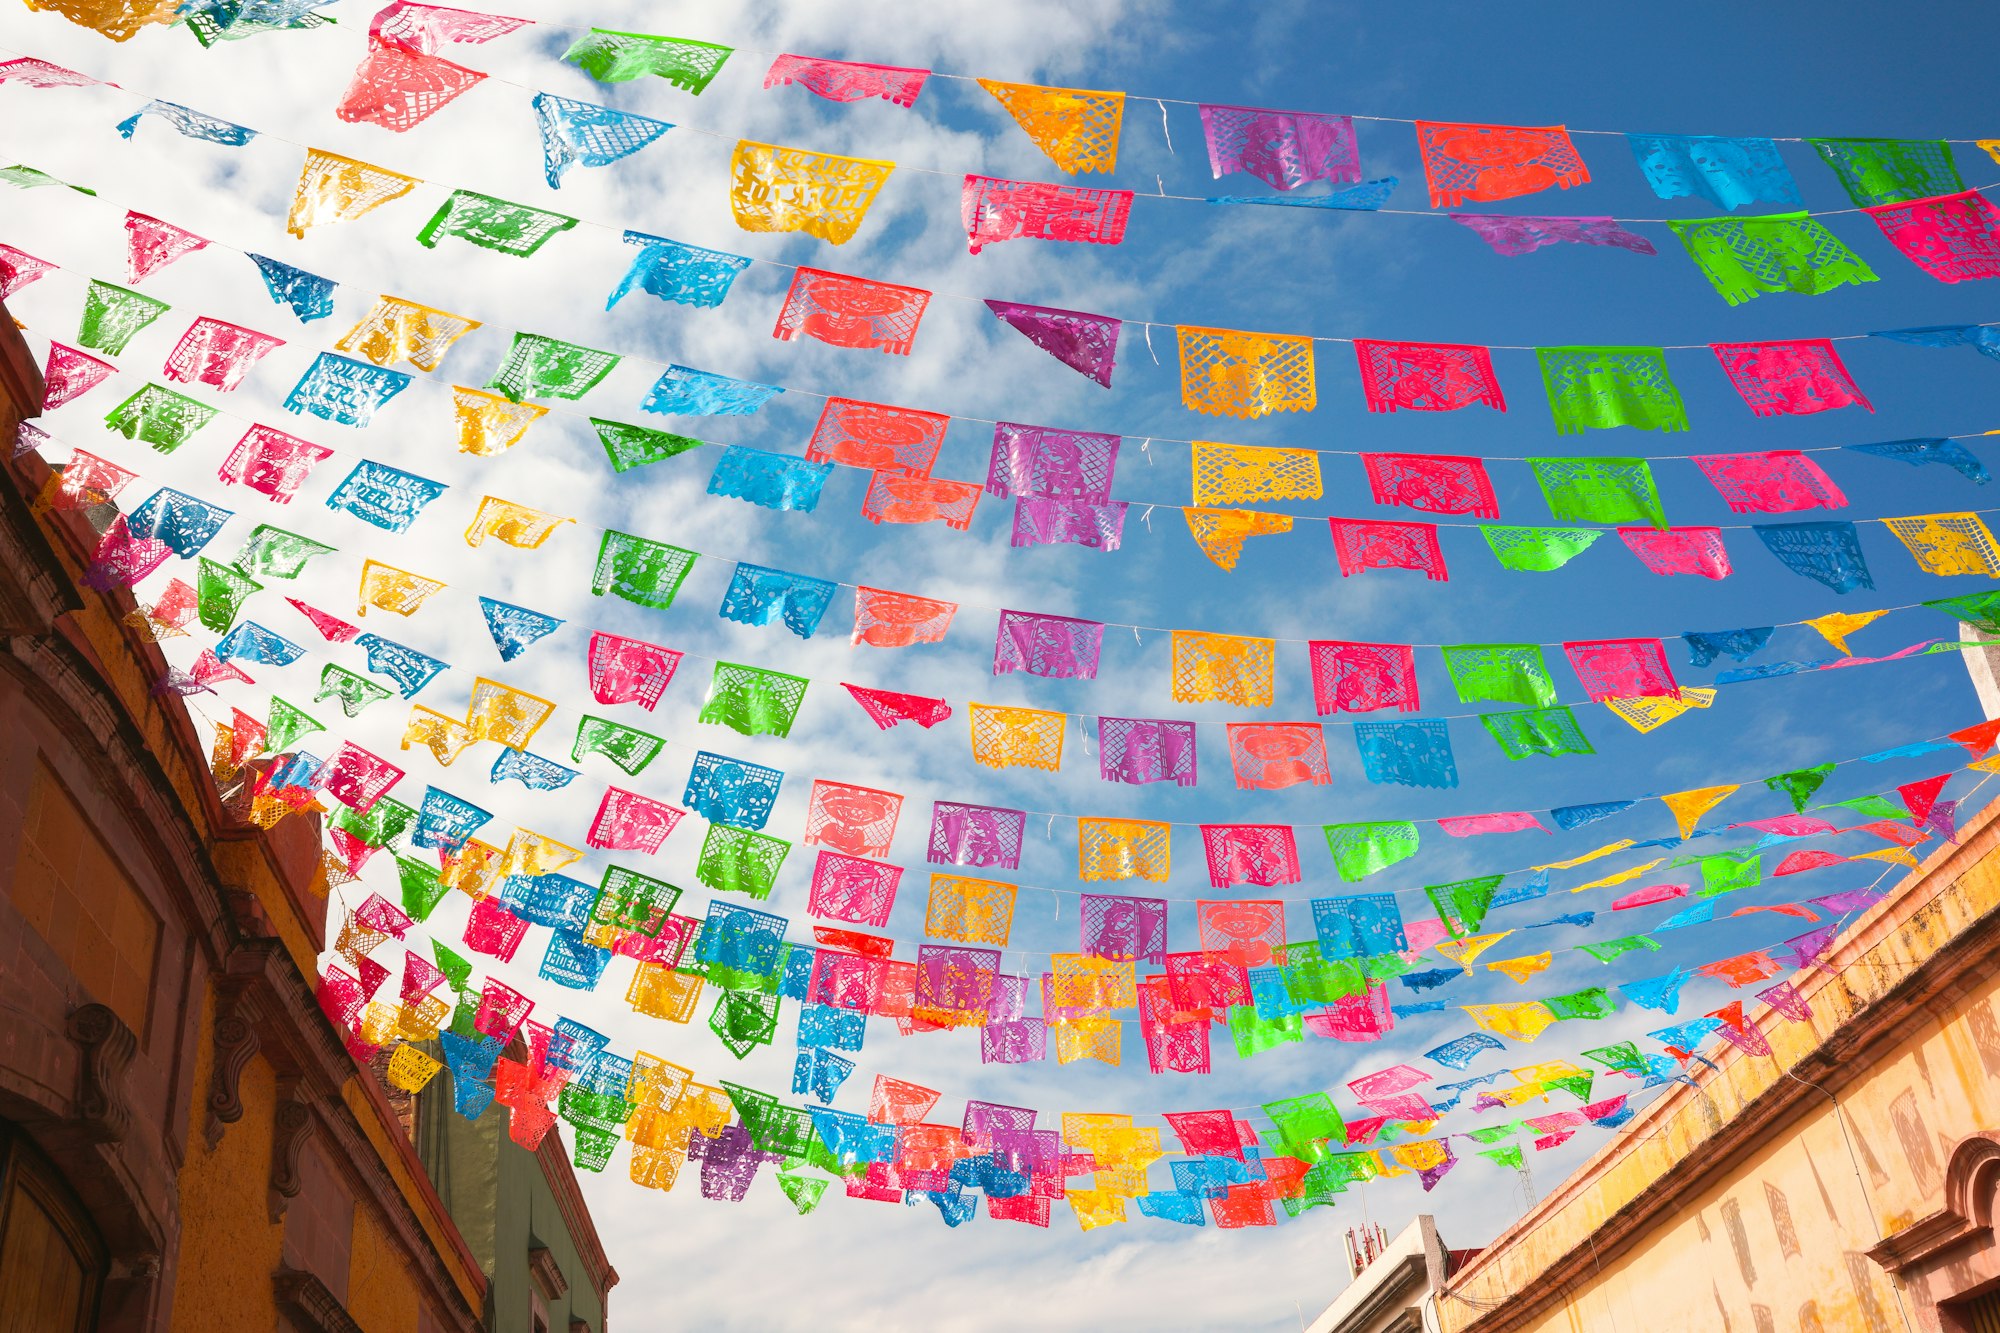 Photo of colorful papel picado banners strung between two buildings with a partly cloudy sky behind.